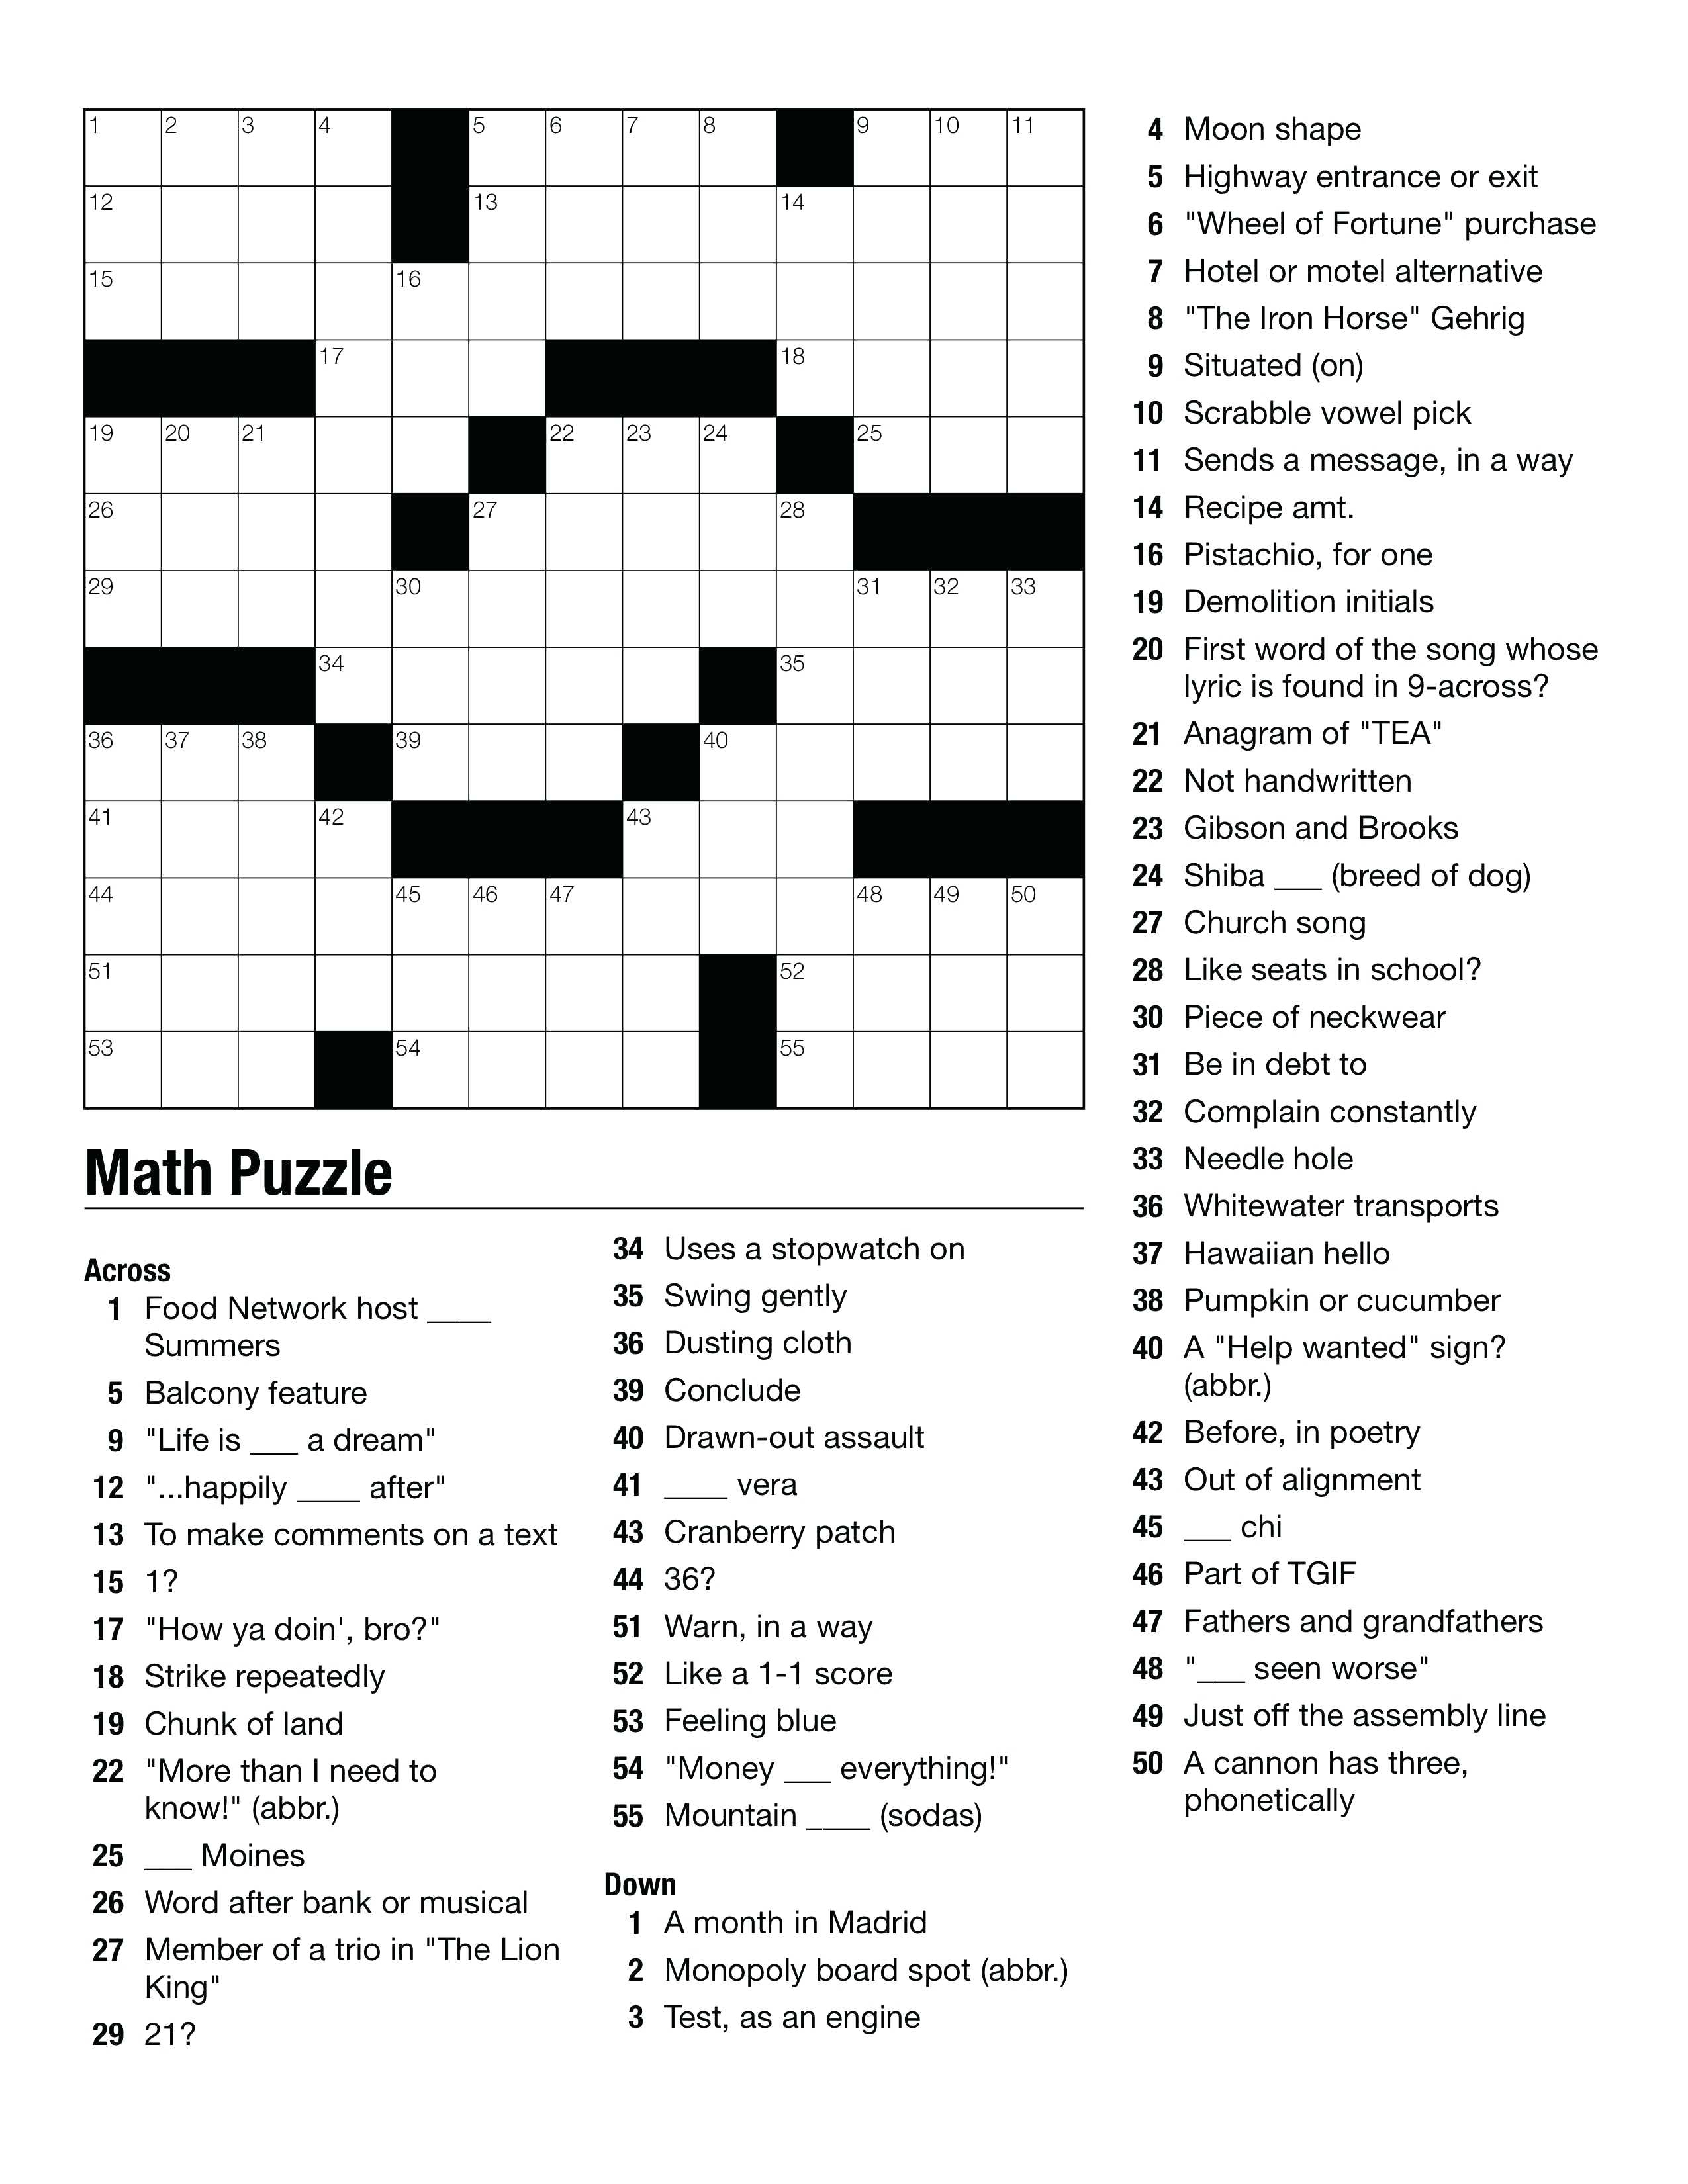 Geometry Puzzles Math Geometry Images Teaching Ideas On Crossword - Printable Puzzles High School